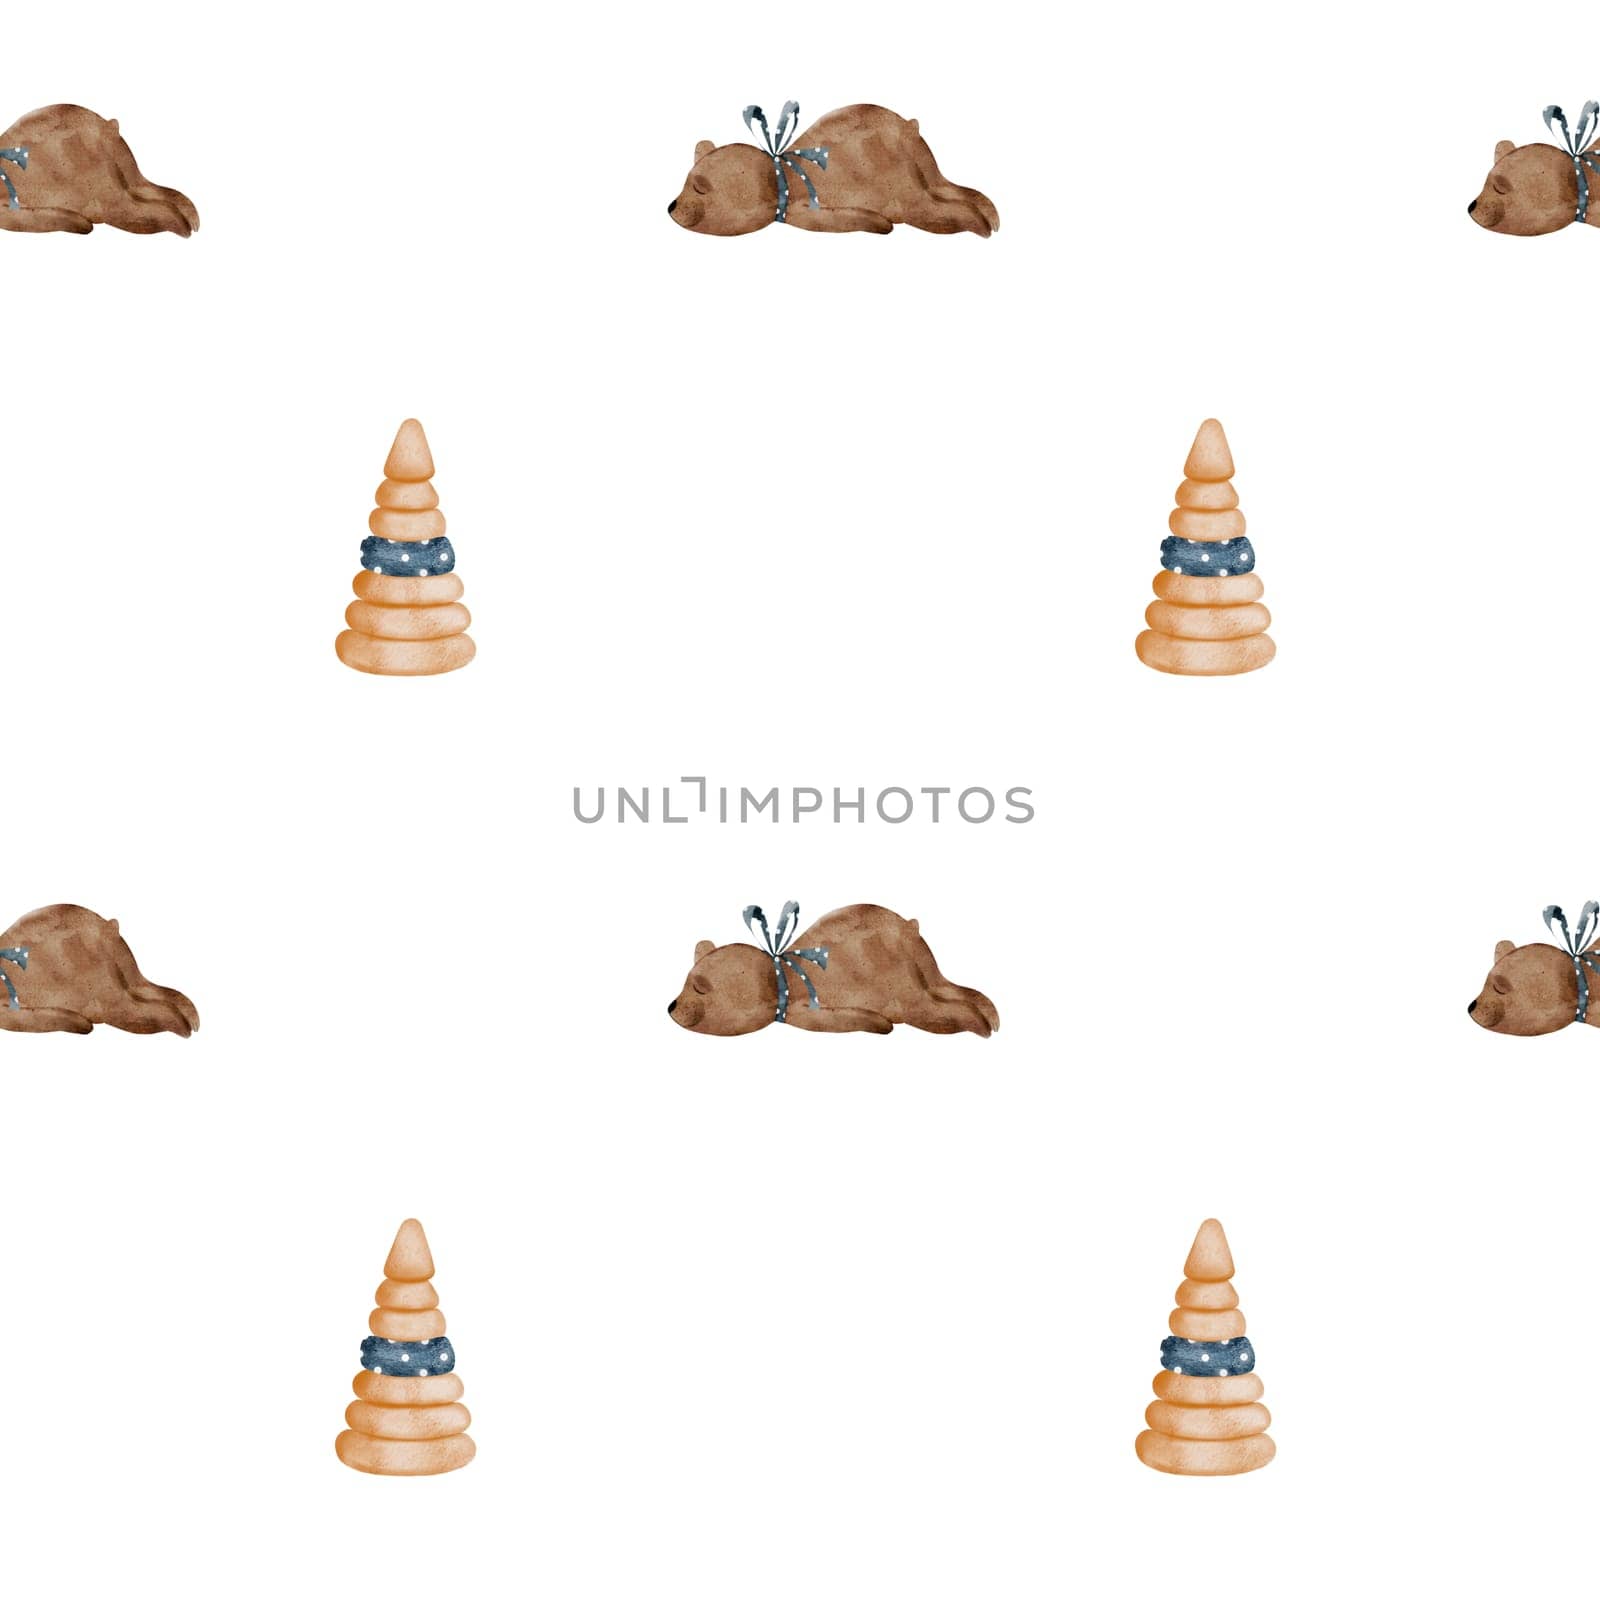 Watercolor seamless pattern of cute little plush bear with a blue bow and a wooden vintage pyramid. Kawaii drawing with an adorable teddy and a toy on a white background. For printing on children's textiles and baby shower wrapping paper. High quality illustration